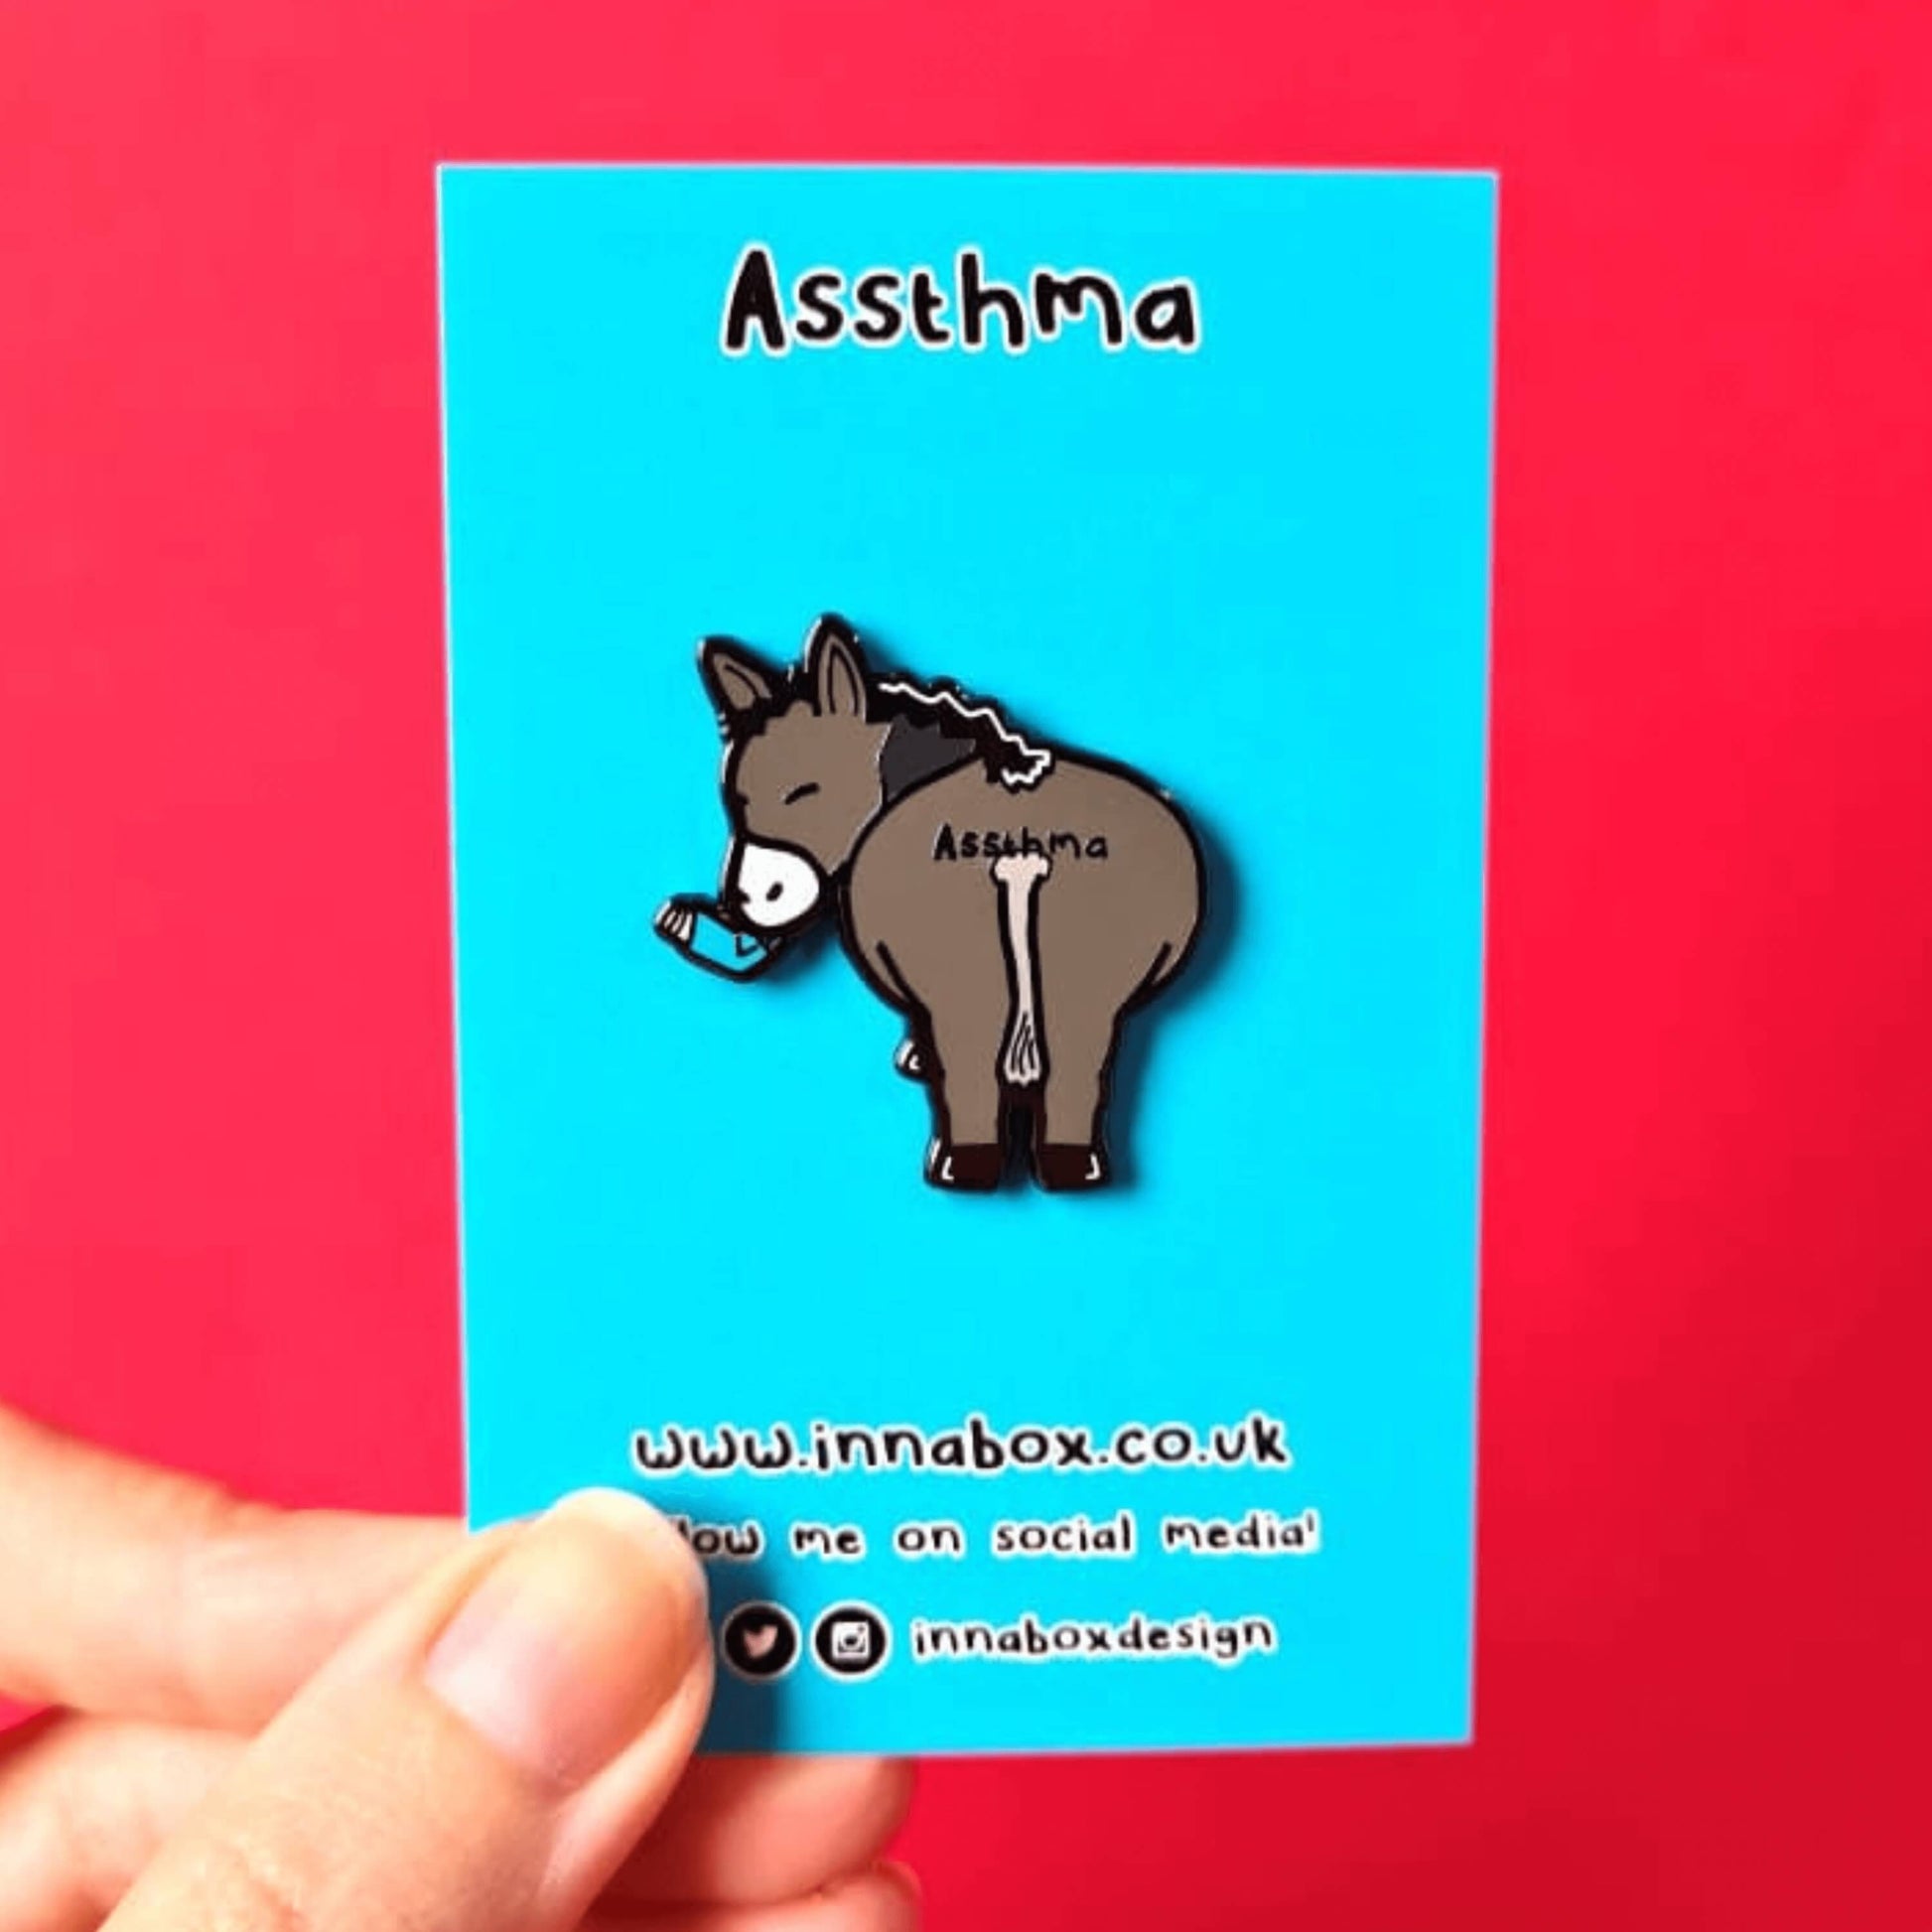 Assthma Enamel Pin - Asthma on blue backing card being held over a red background. A grey donkey ass showing its behind with a blue asthma pump in its mouth and the word Assthma across its behind. The pin is designed to raise awareness for asthma.